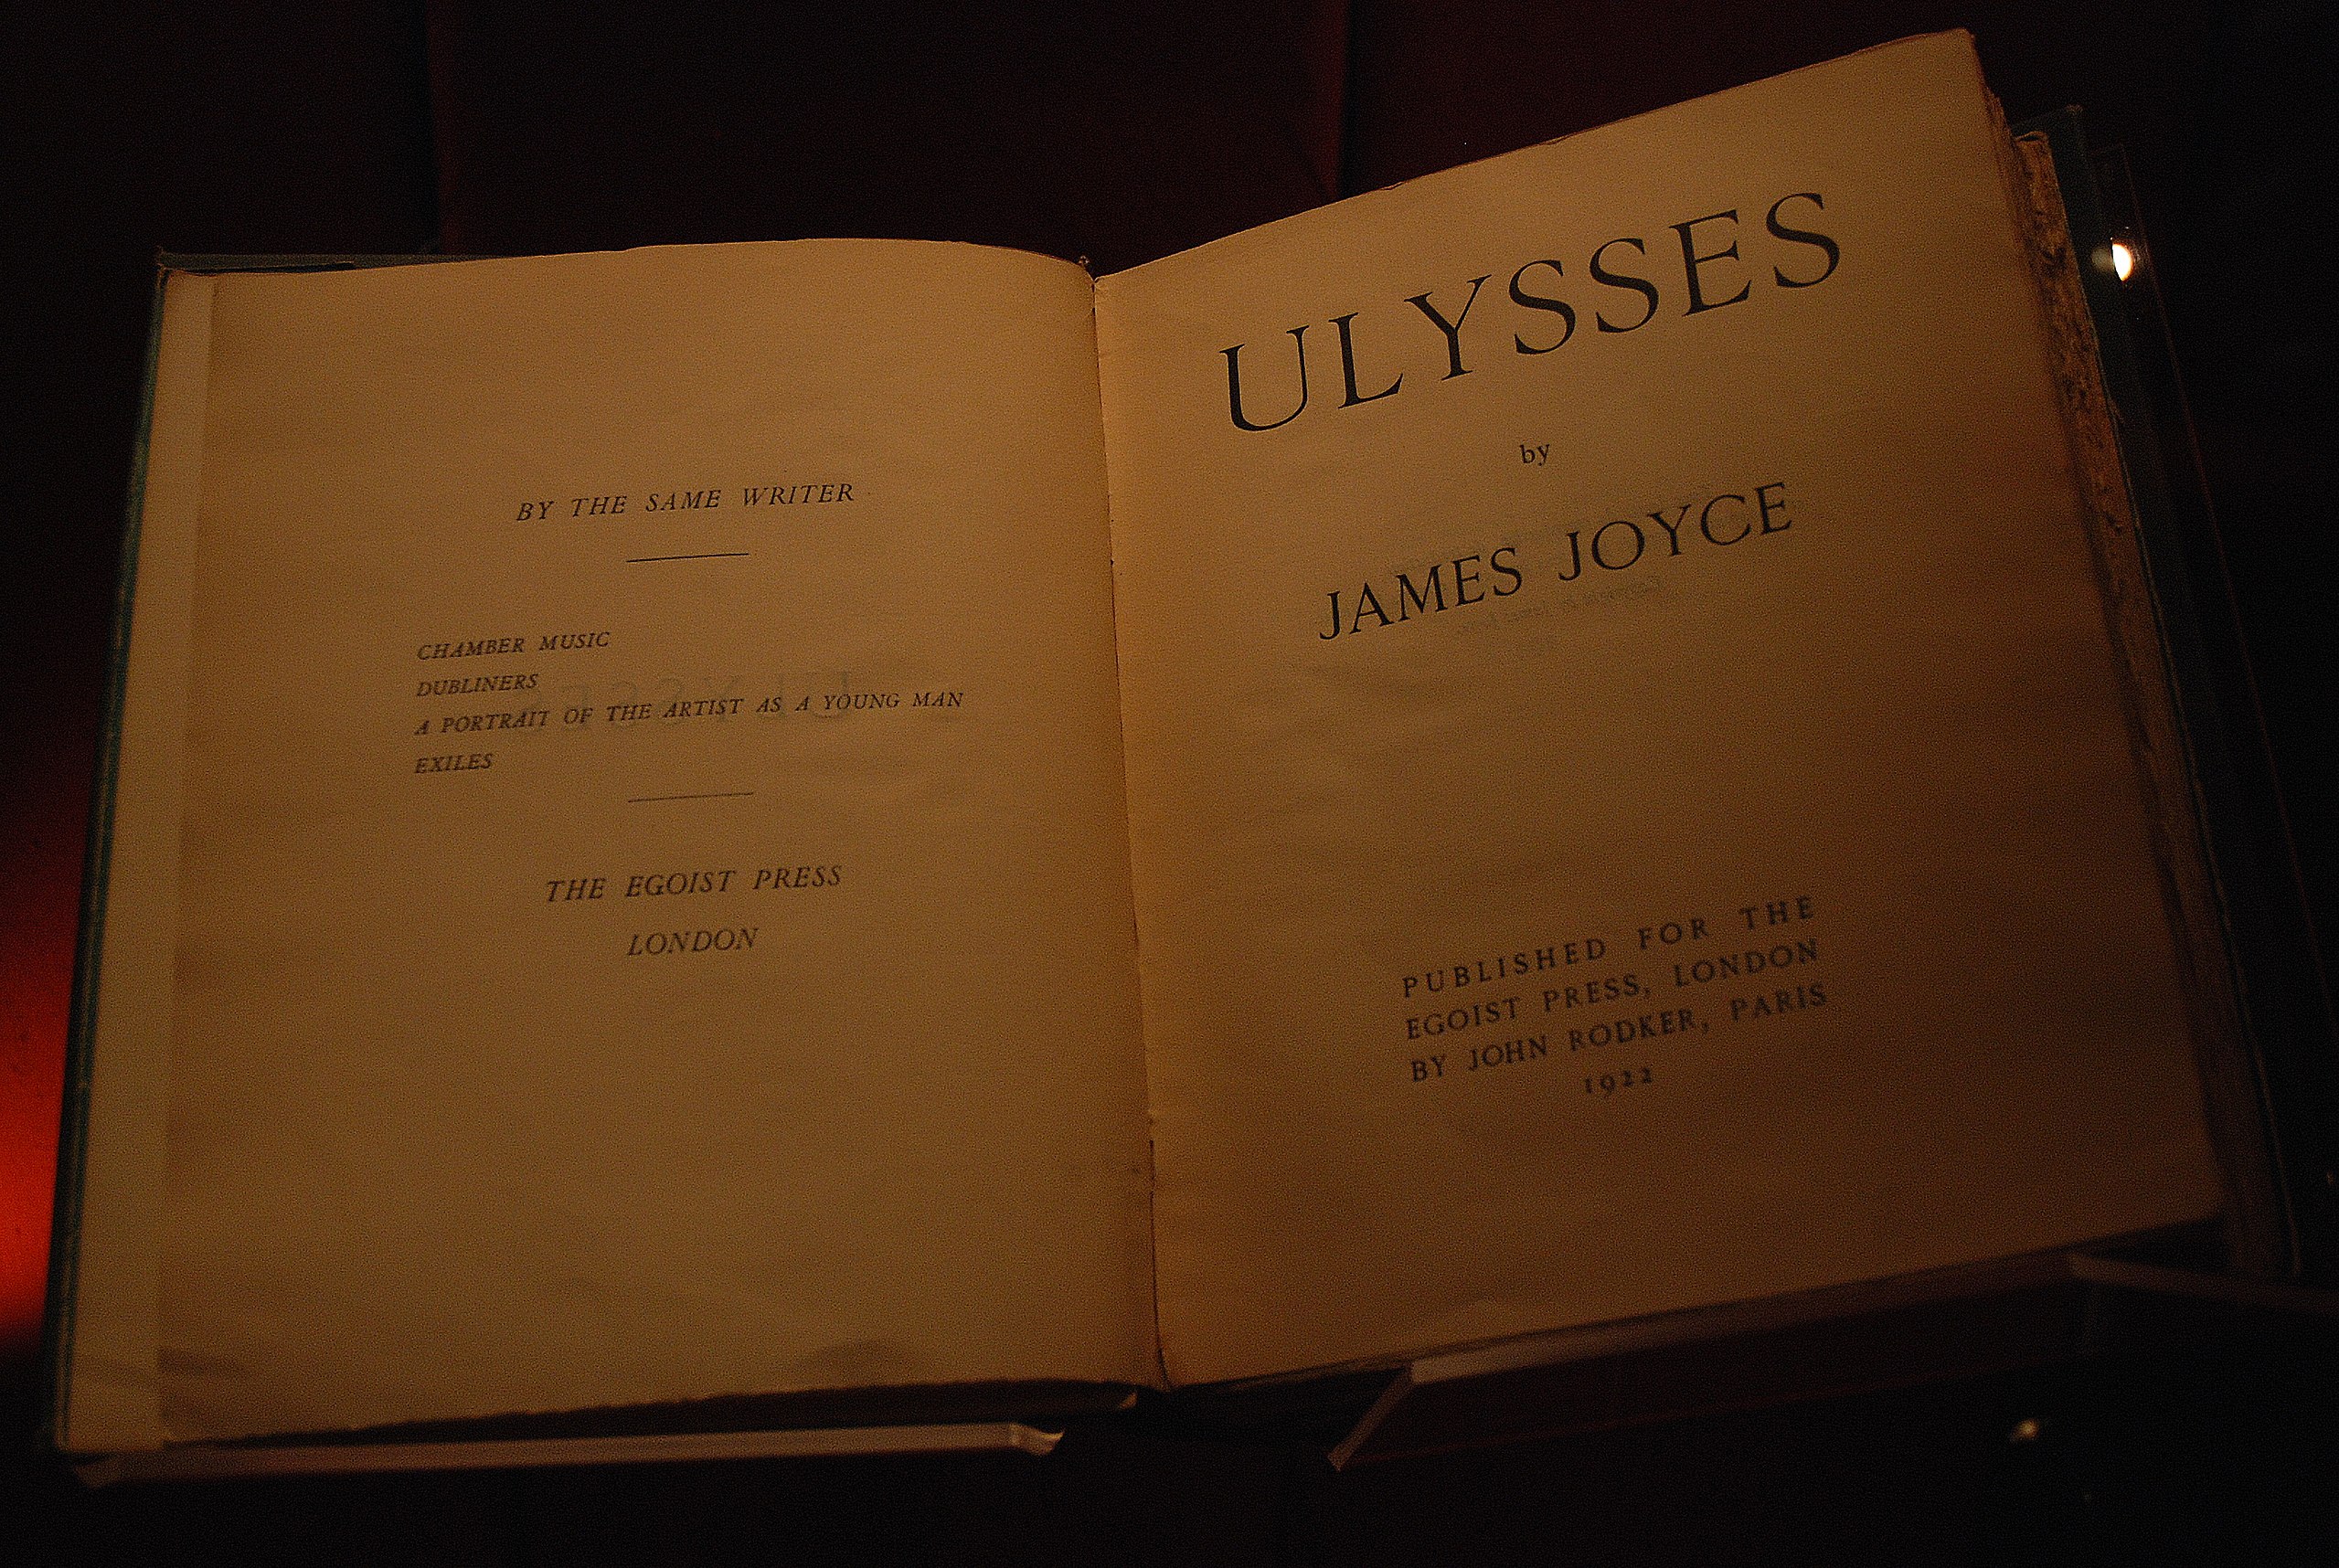 an open book with the title ulysseses written on it.